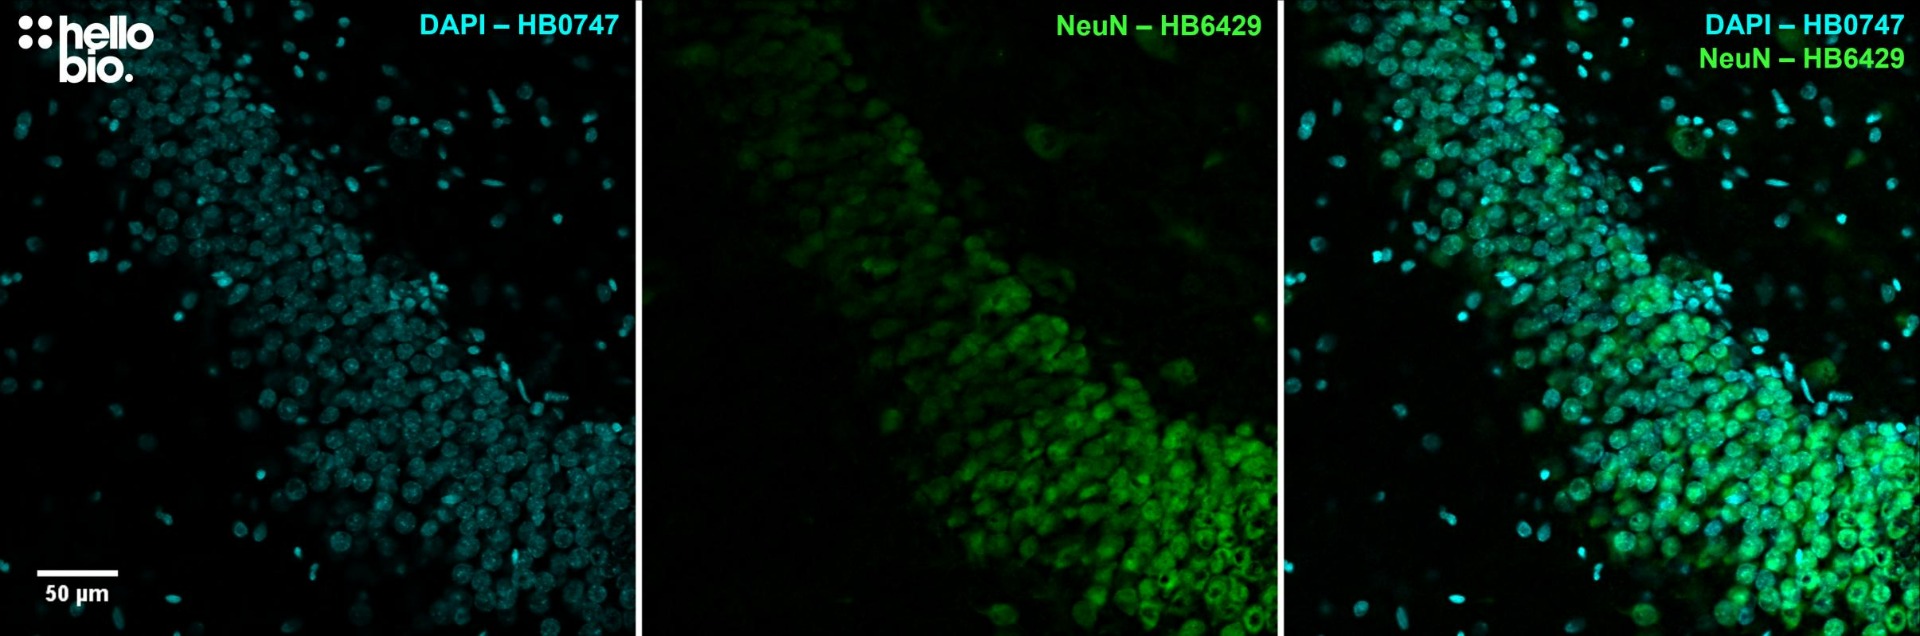 Figure 5. NeuN expression in the granule cell layer of the rat dentate gyrus visualised using HB6429. 